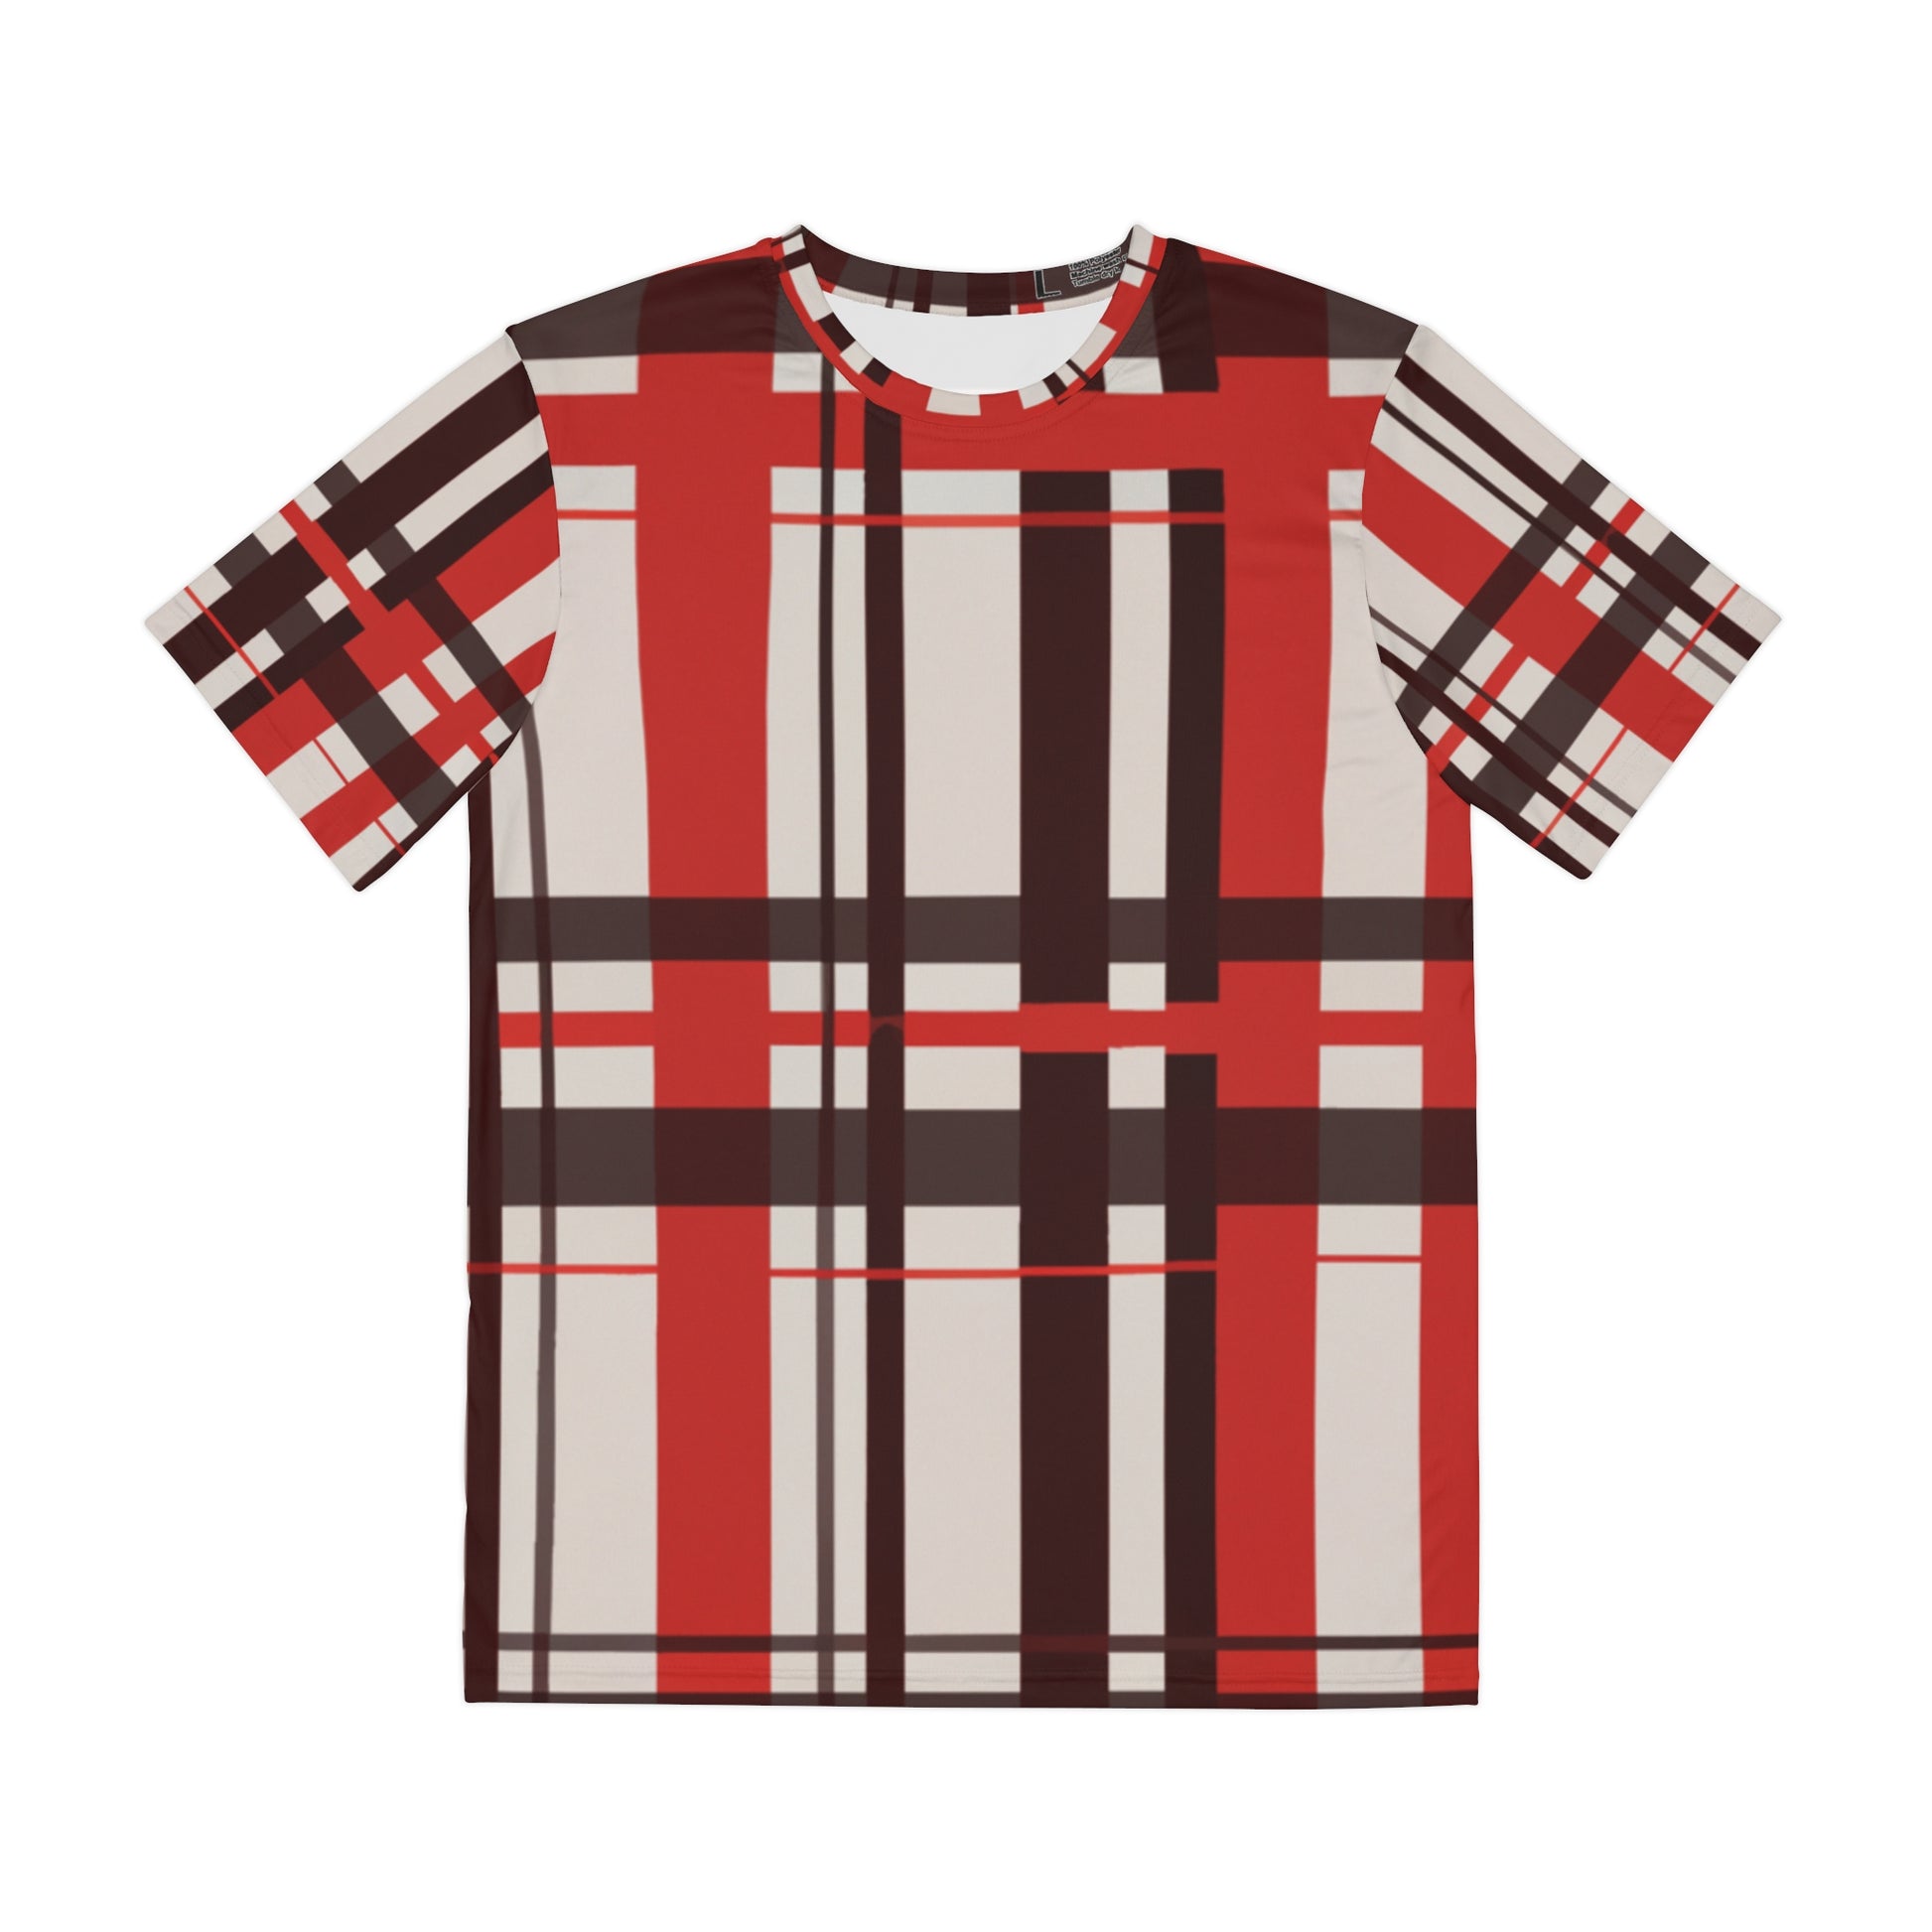 Front view of the Highland Ember Dawn Tartan Crewneck Pullover All-Over Print Short-Sleeved Shirt black red white plaid pattern 